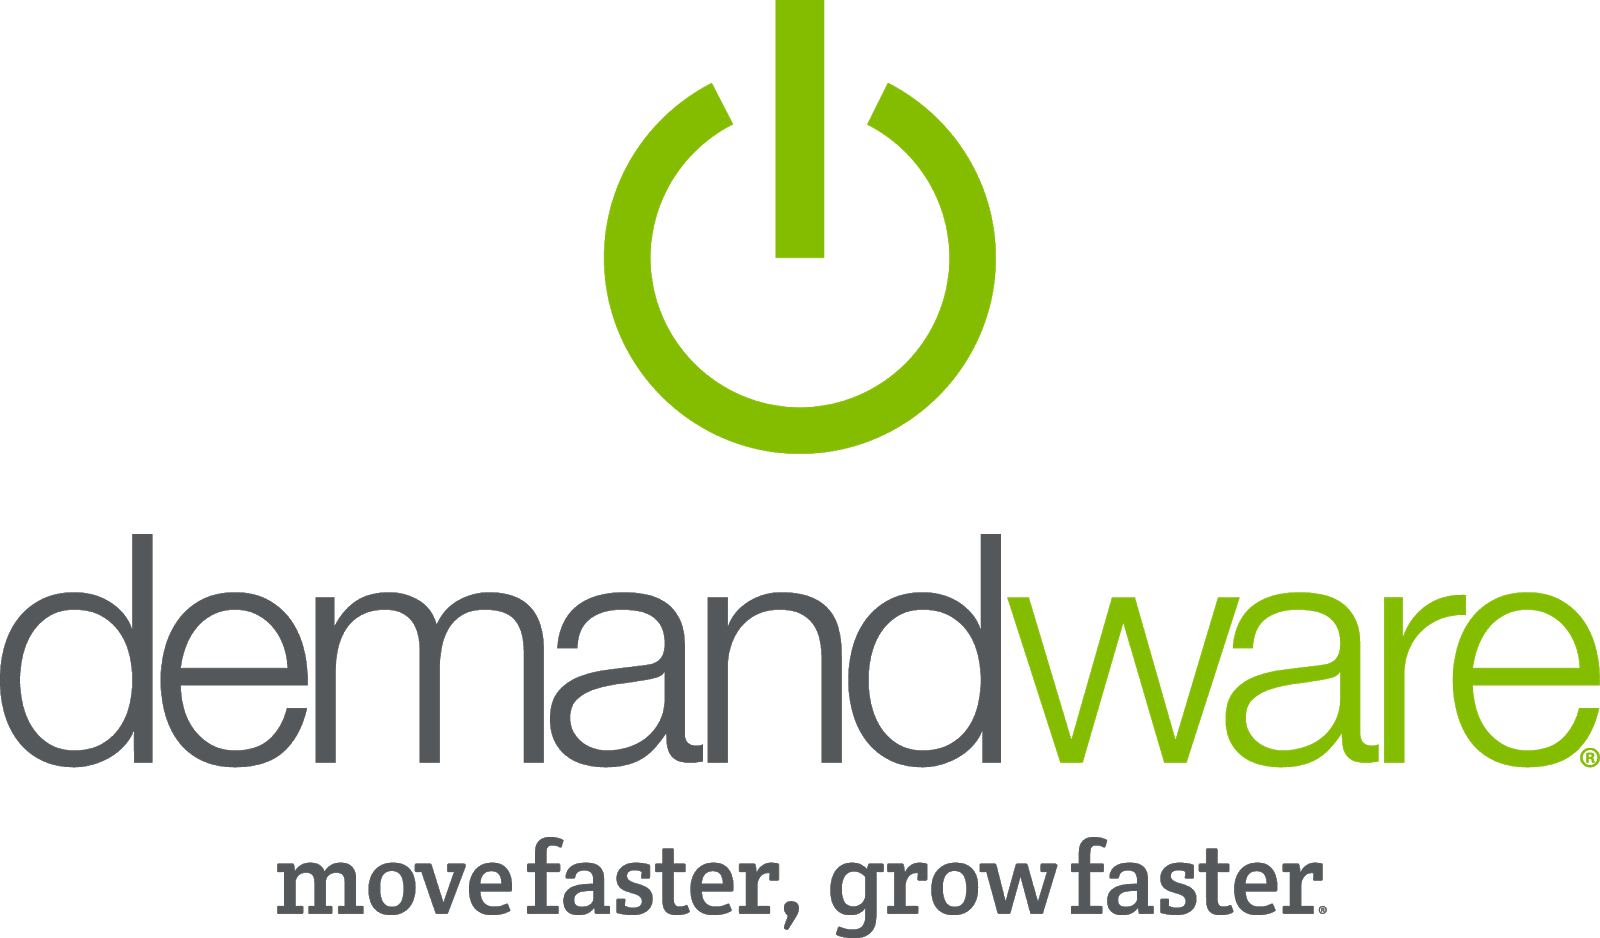  Demandware provides online merchants with features for seamless businesses across all channels